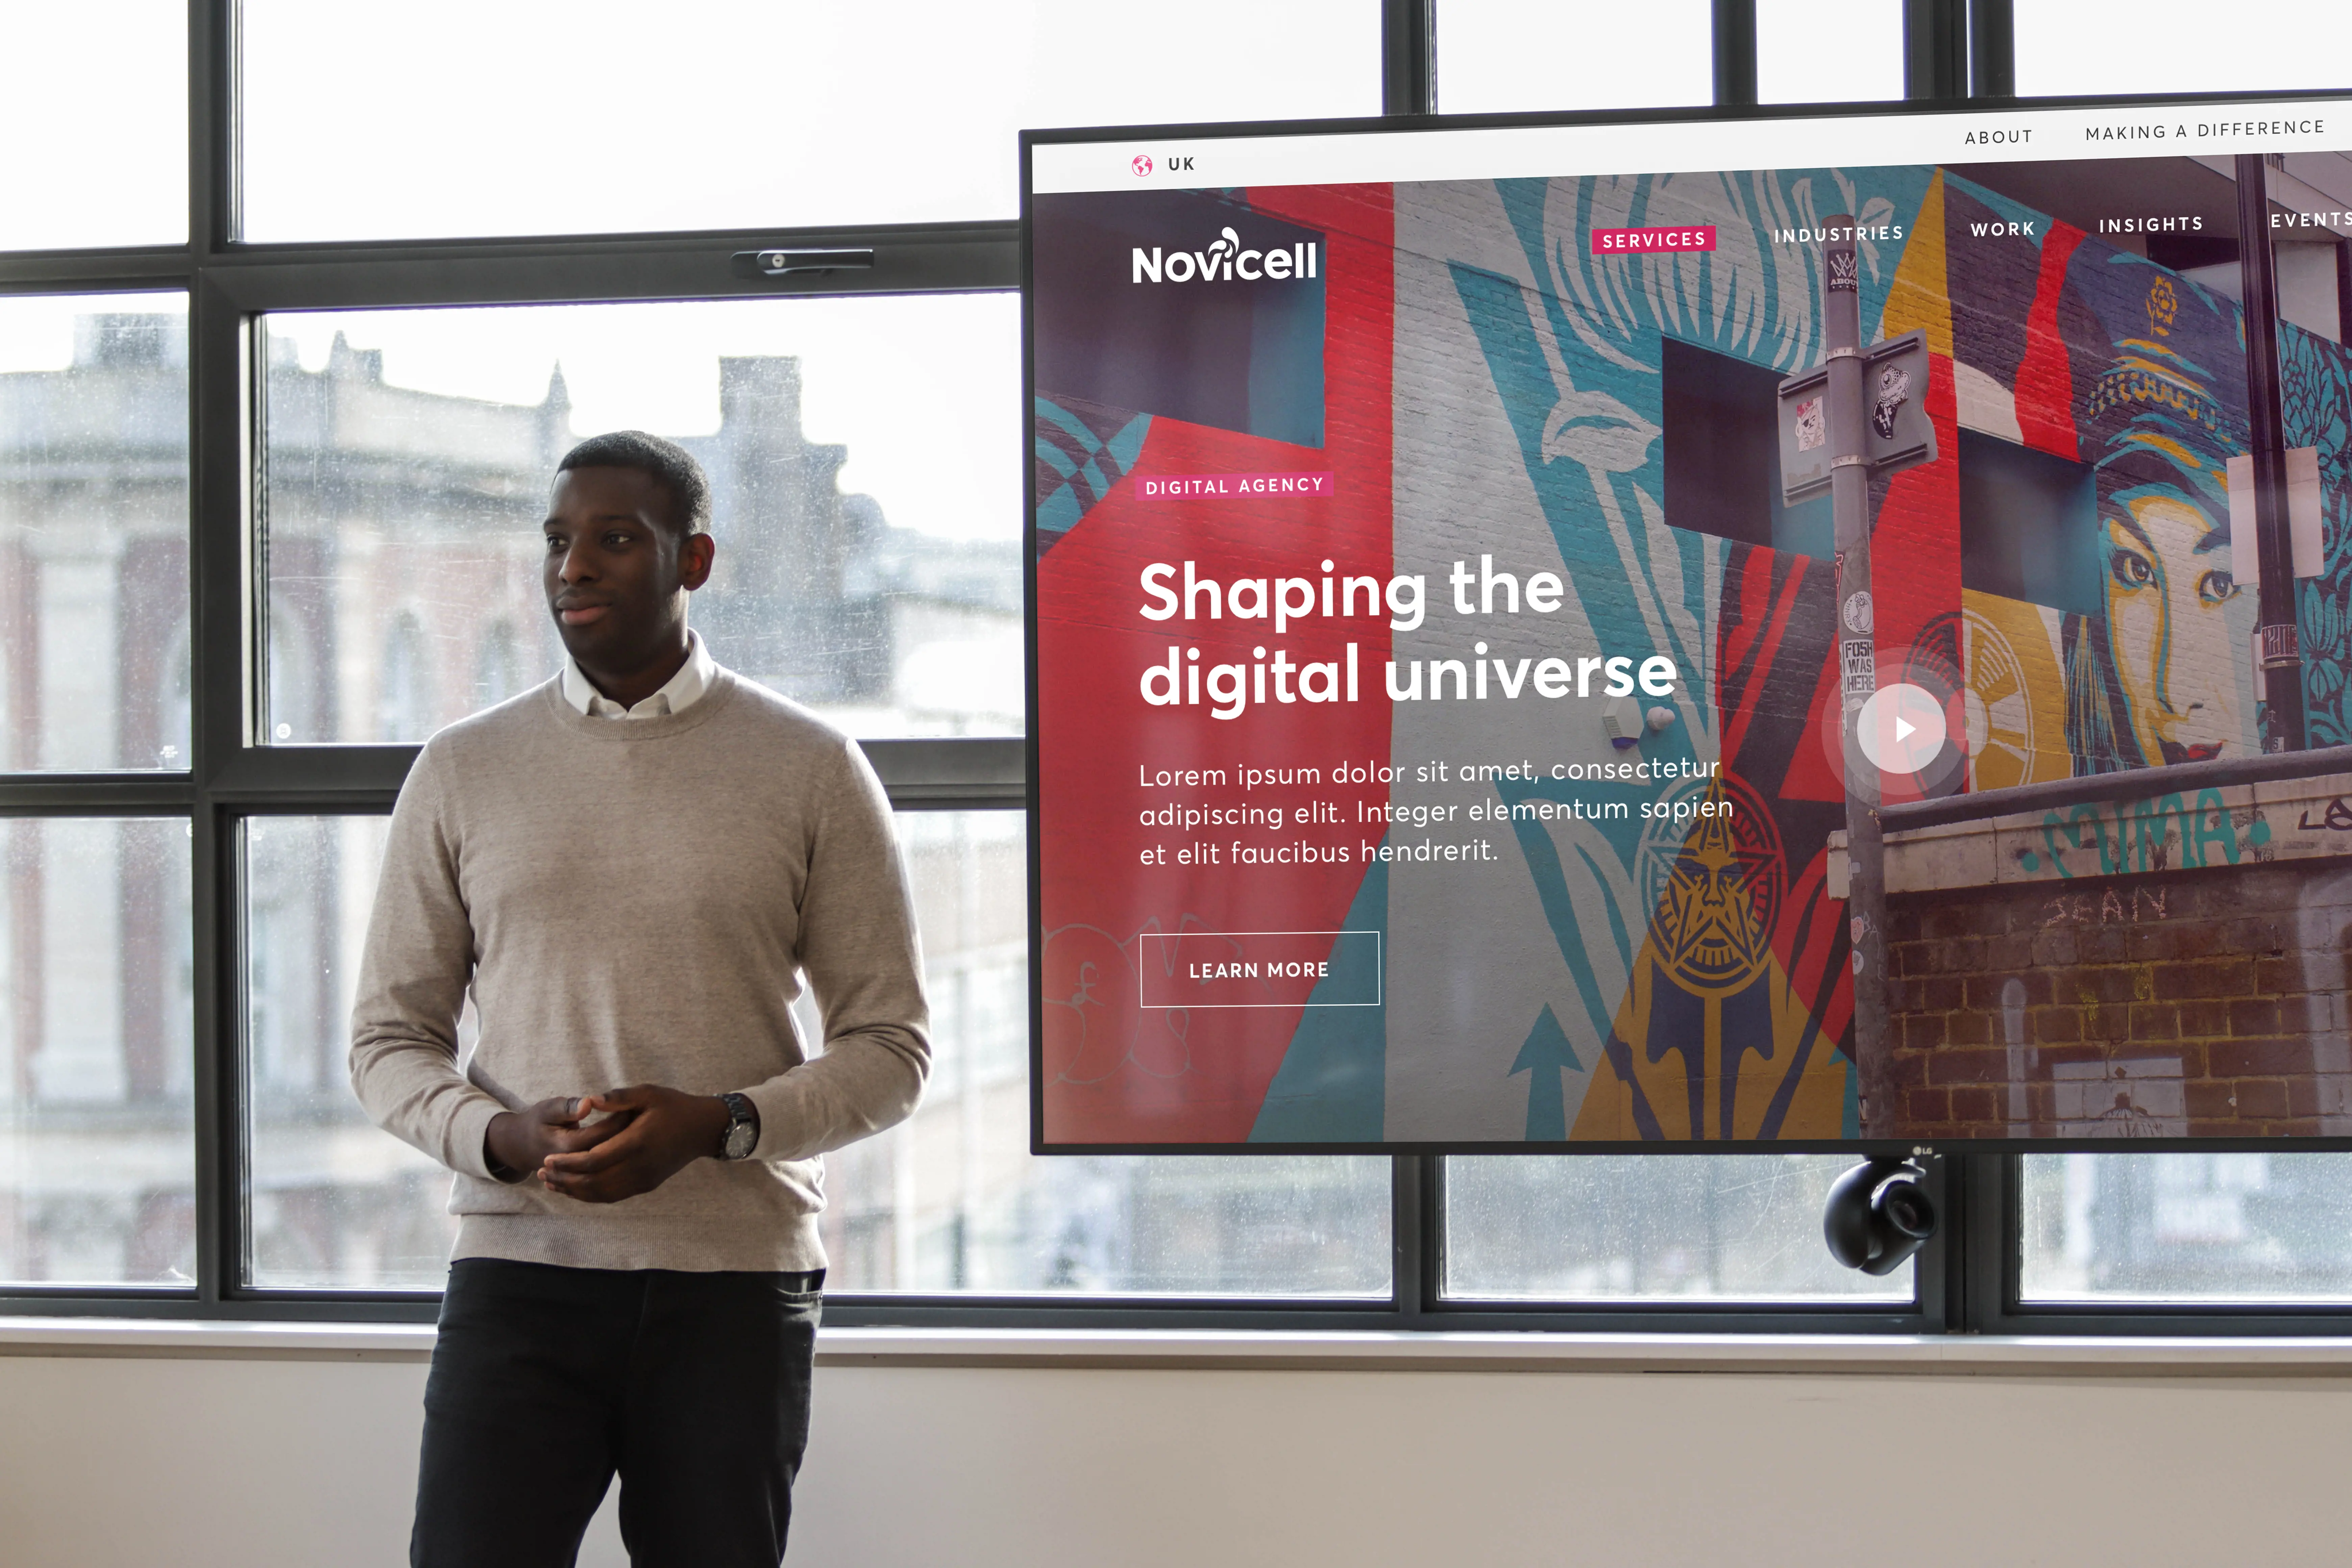 A man in business casual attire standing next to a large screen displaying a Novicell website